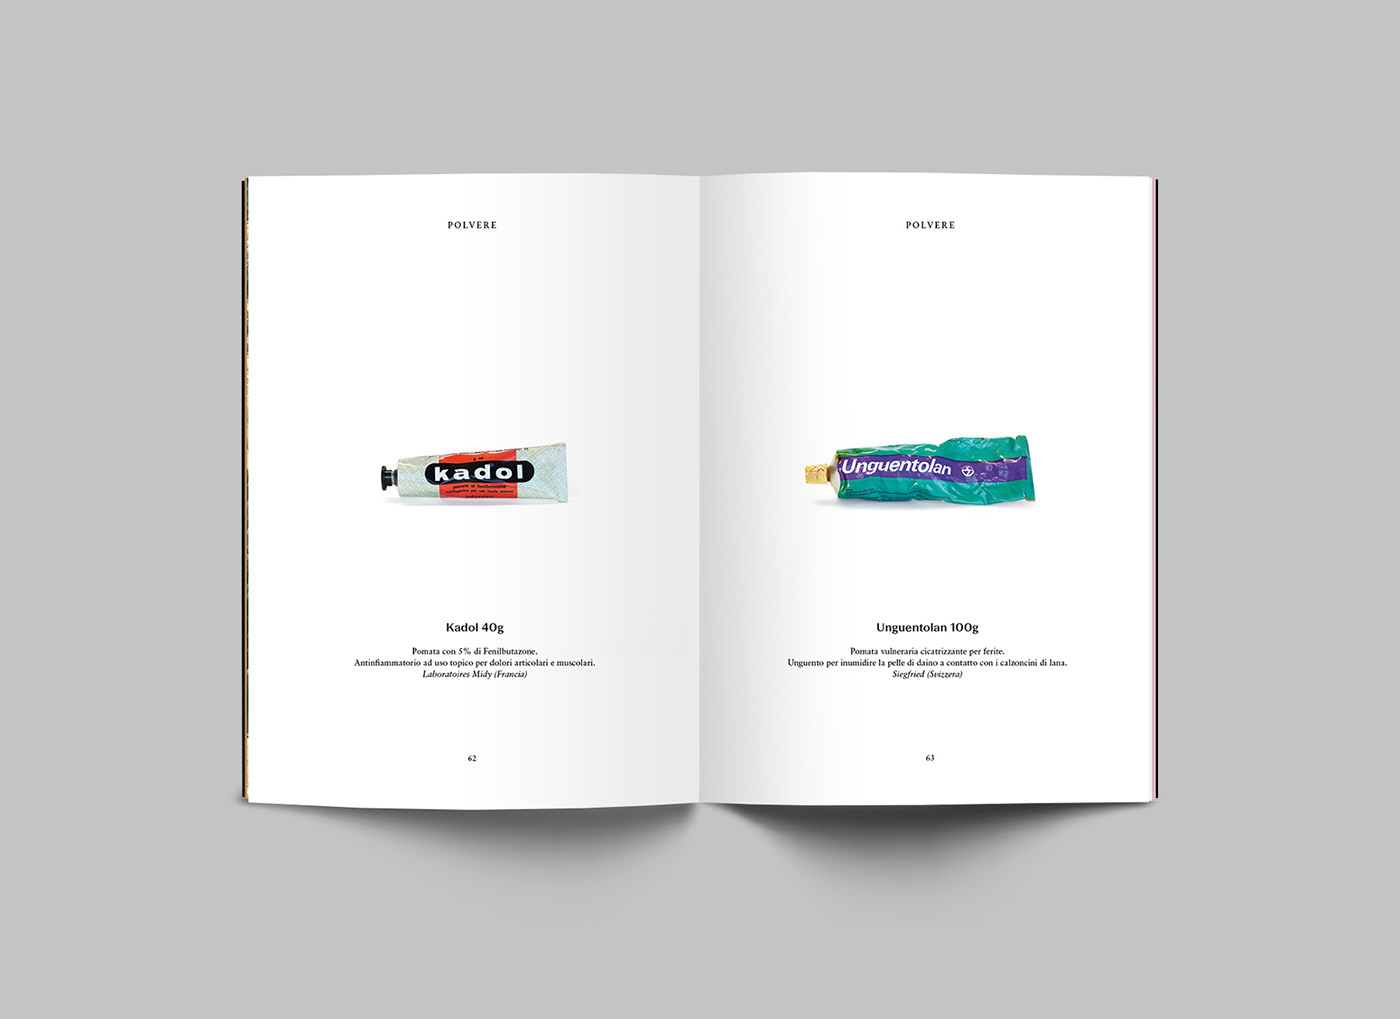 Cycling Drugs medicines photo storytelling   article typography   graphic magazine